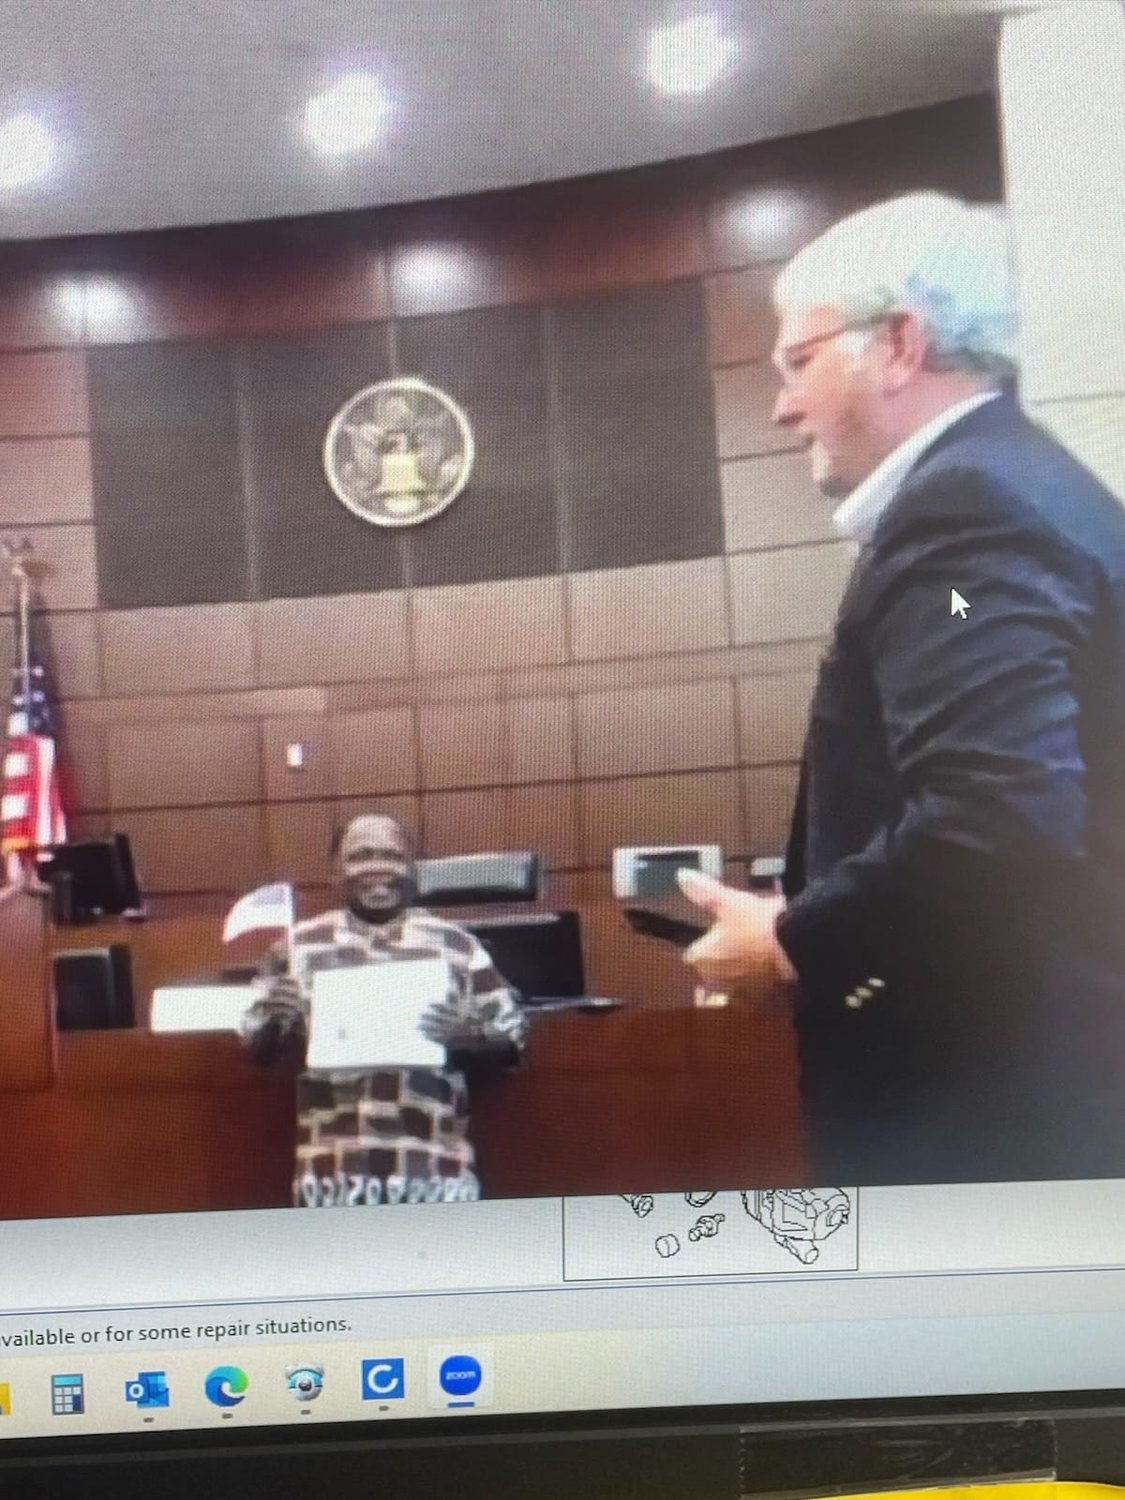 This is a screen shot of the livestream of Father Boniface Kasiita Nzabonimpa as he takes his pledge in St. Louis in order to become a U.S. citizen.